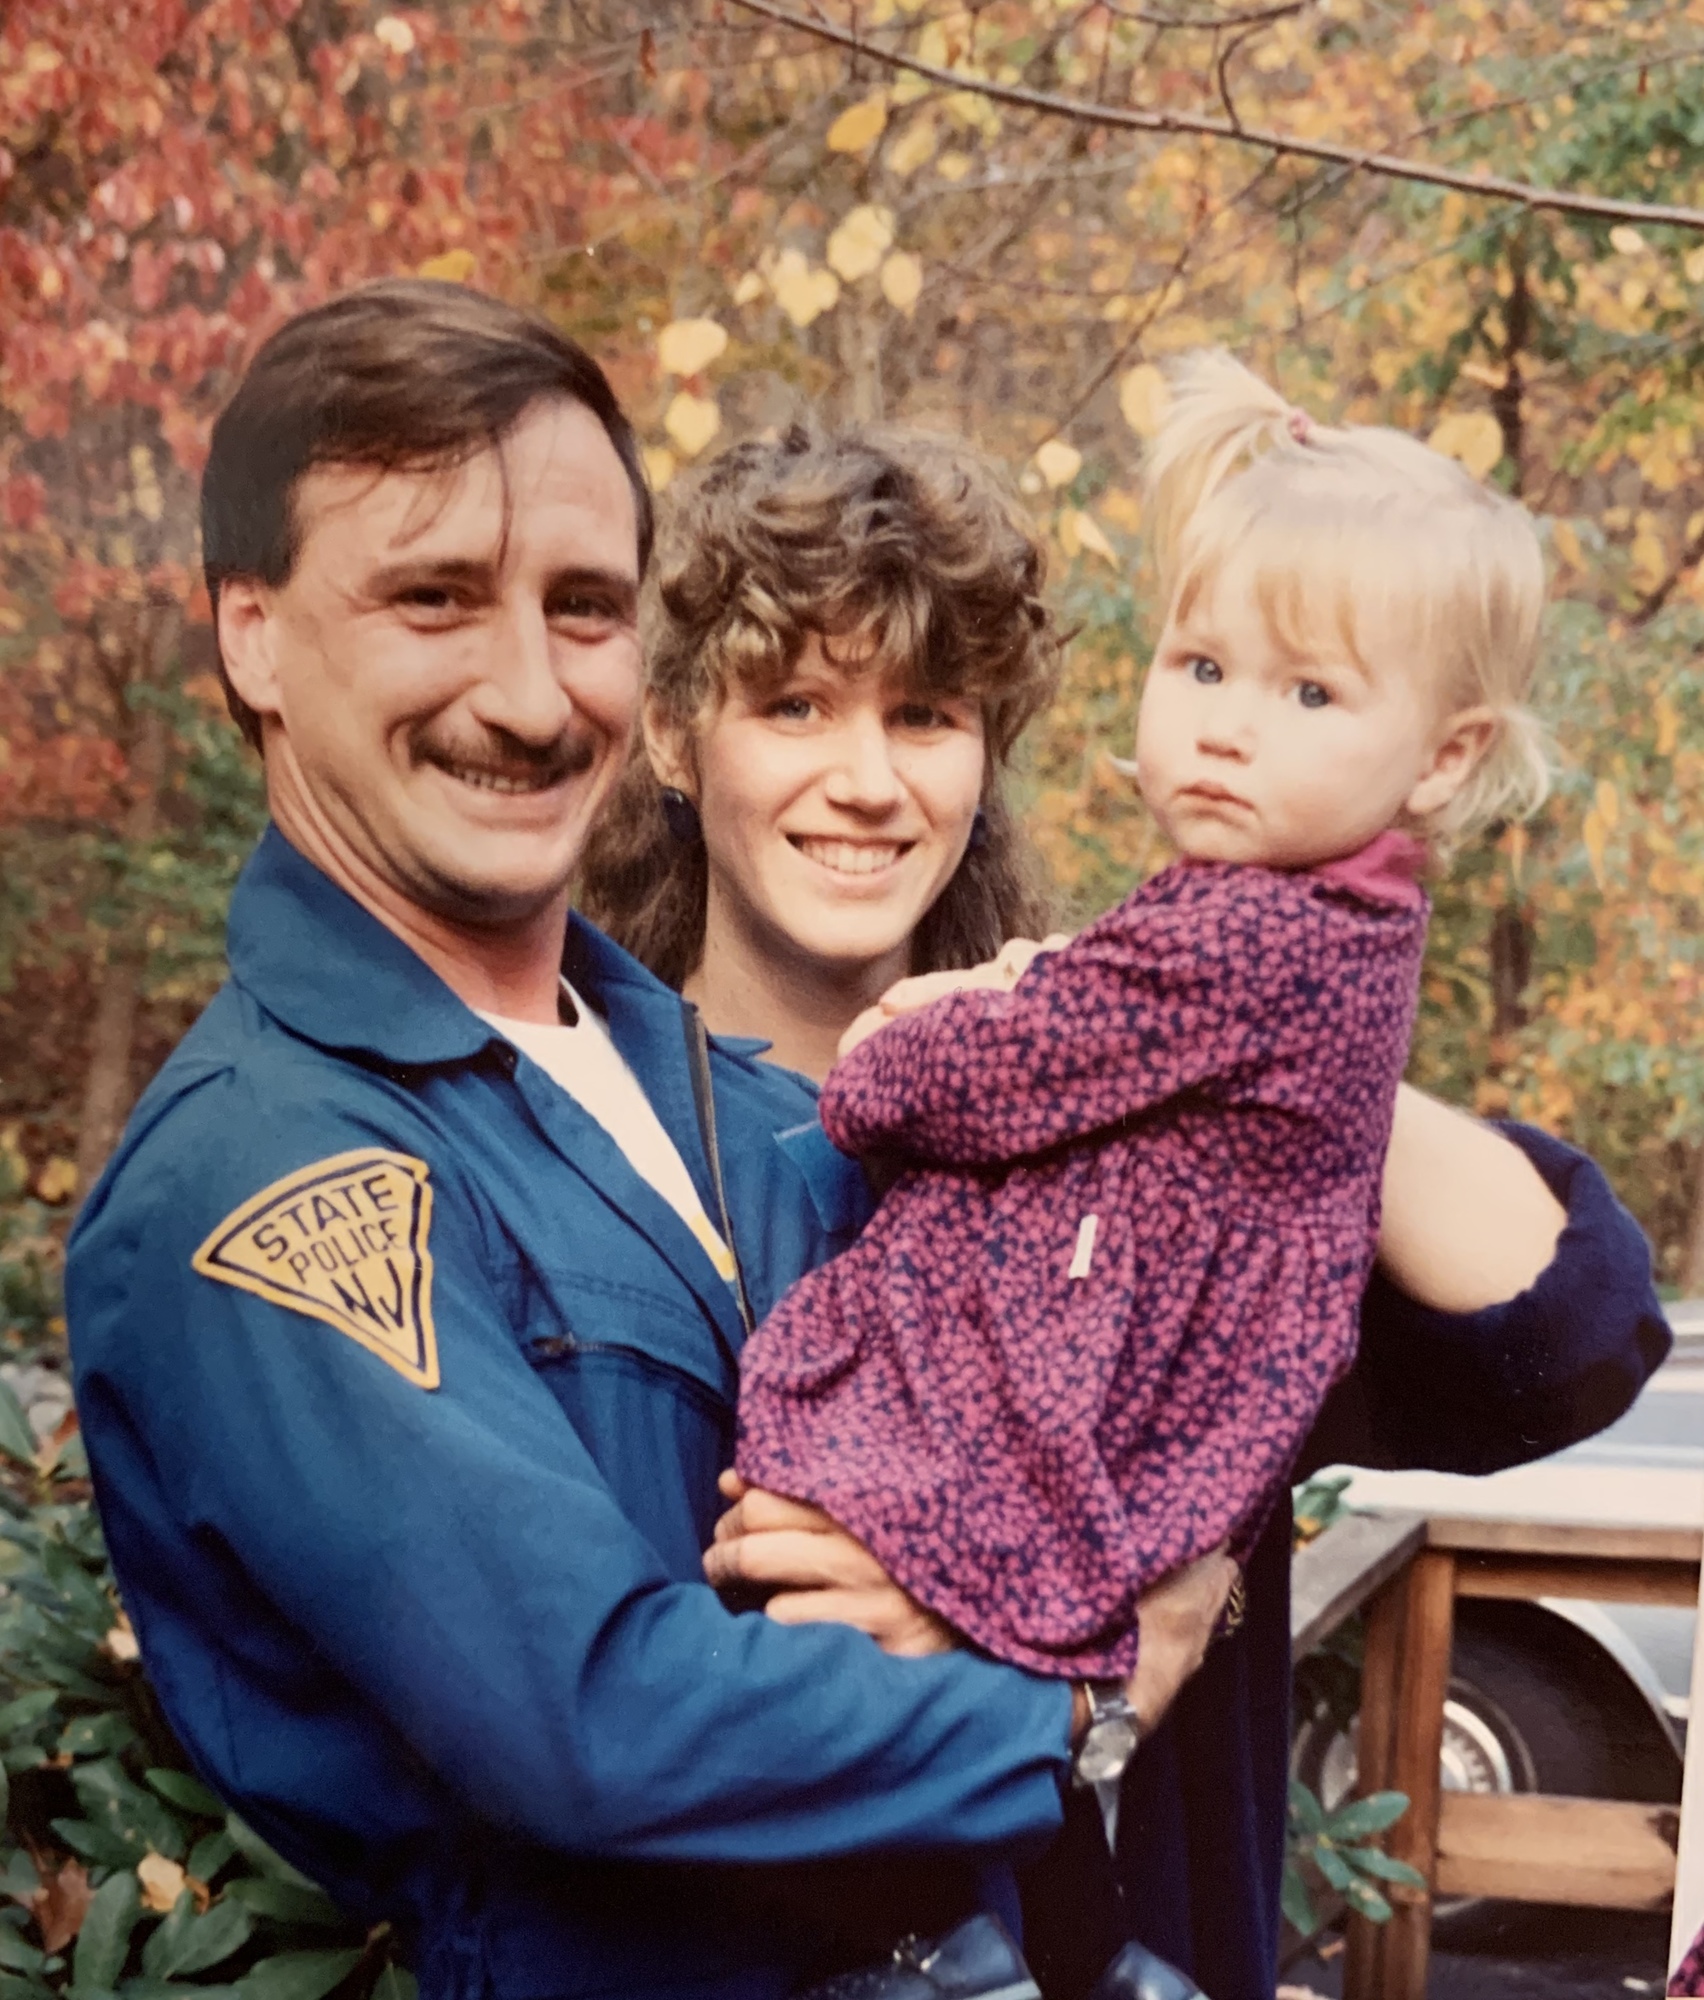 Jerry Tomasso, Sue Tomasso and Allison Tomasso pose for a 1995 photo in New Jersey, where he worked as a state trooper. (Courtesy of David Tomasso)